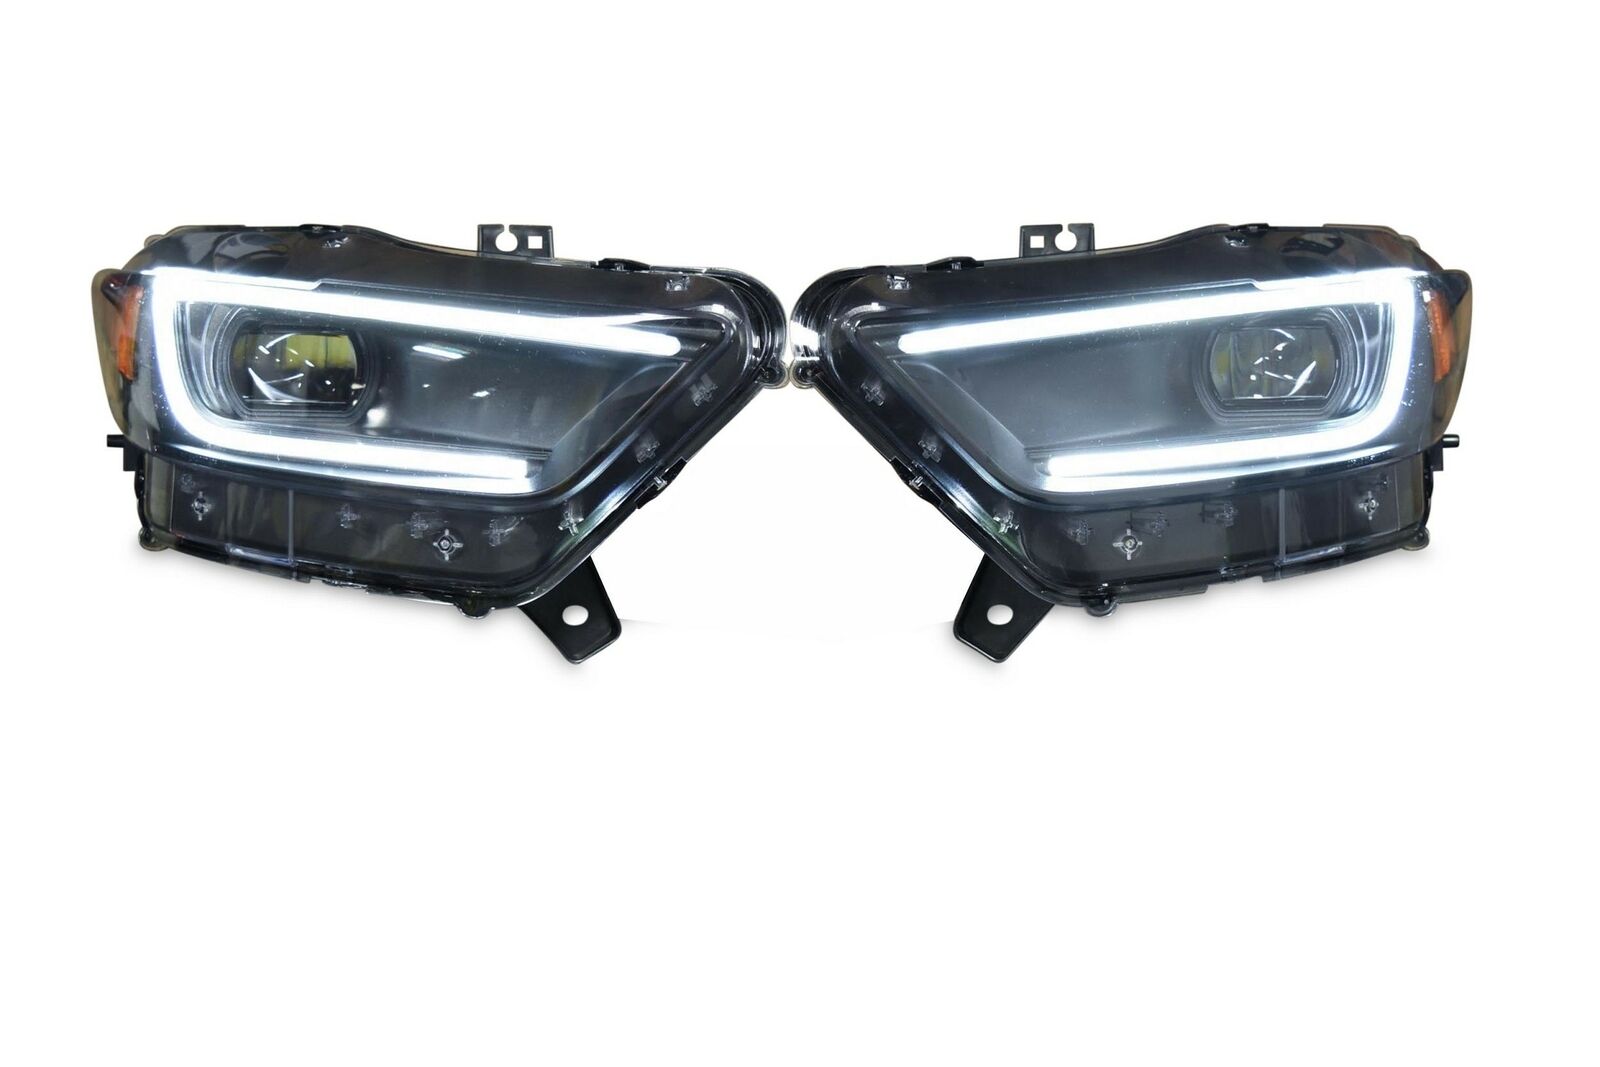 Morimoto XB LED Headlight Assembly For 2015-2017 Ford Mustang 2015-2018 GT350